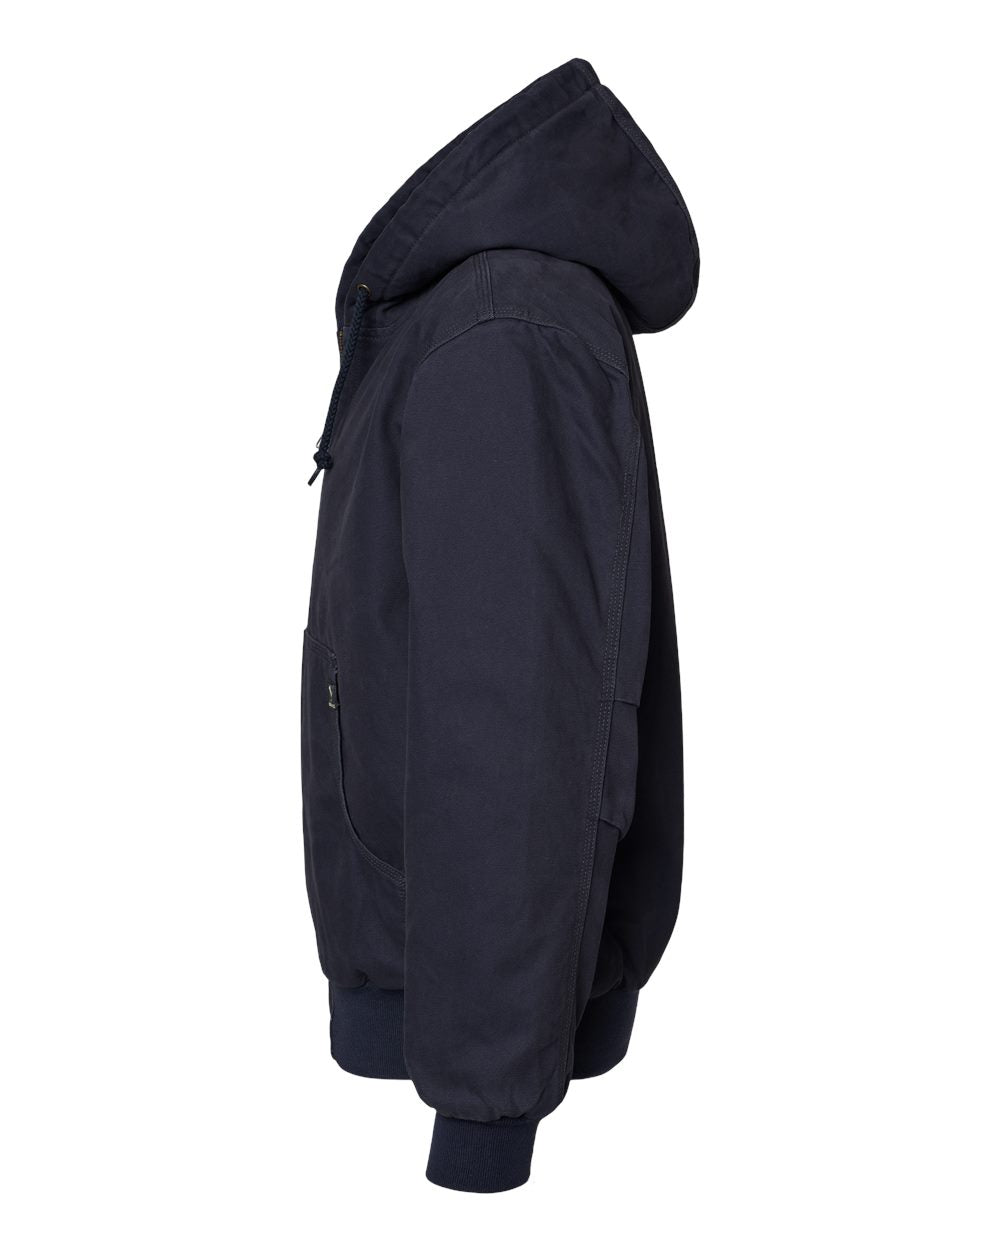 DRI DUCK Cheyenne Boulder Cloth™ Hooded Jacket with Tricot Quilt Lining 5020 #color_Navy